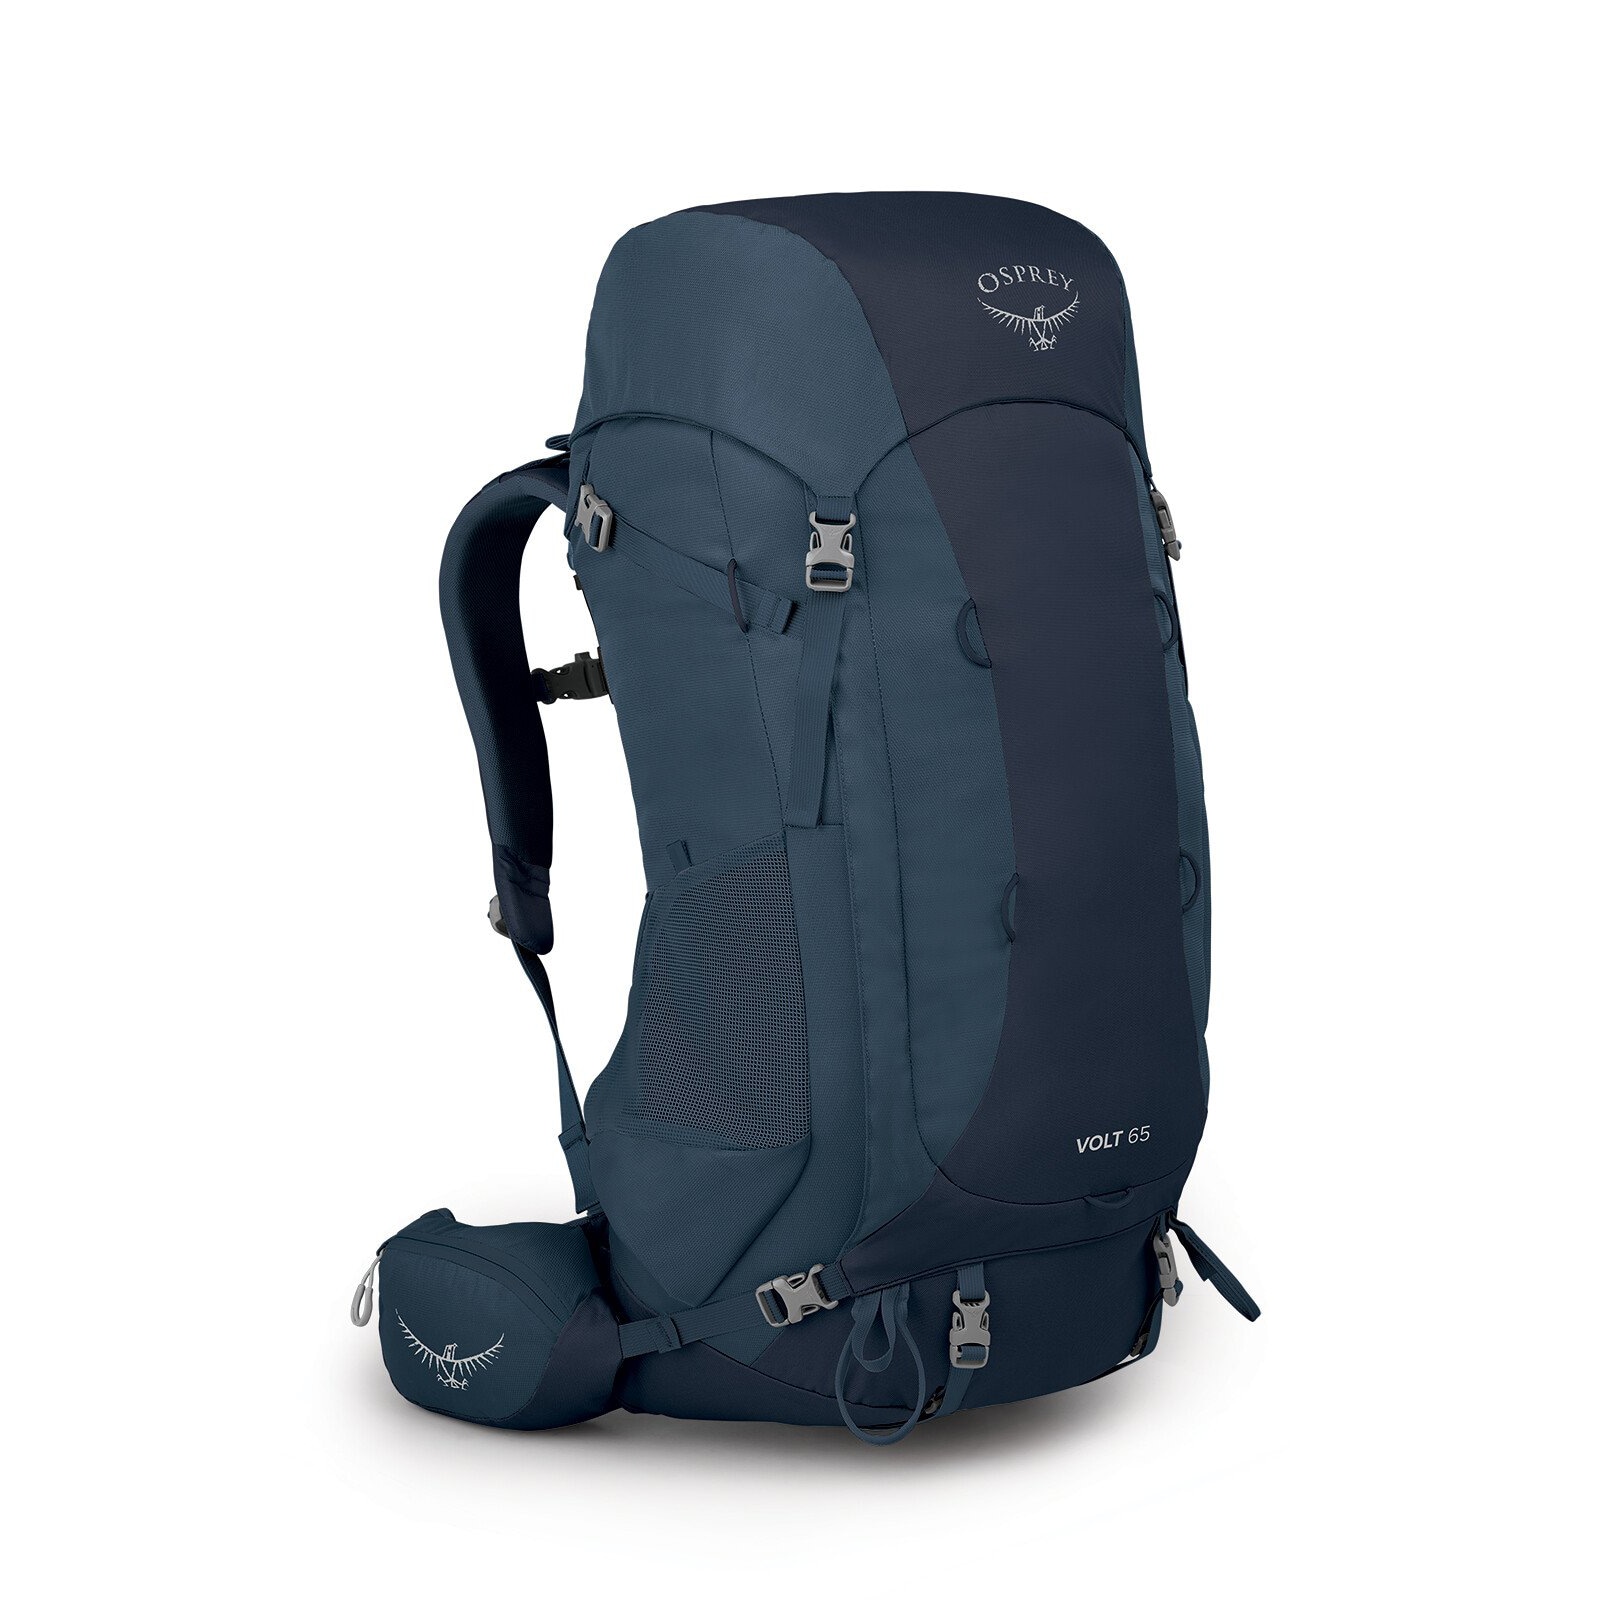 Backpack, Go Fish – The Silver Barn